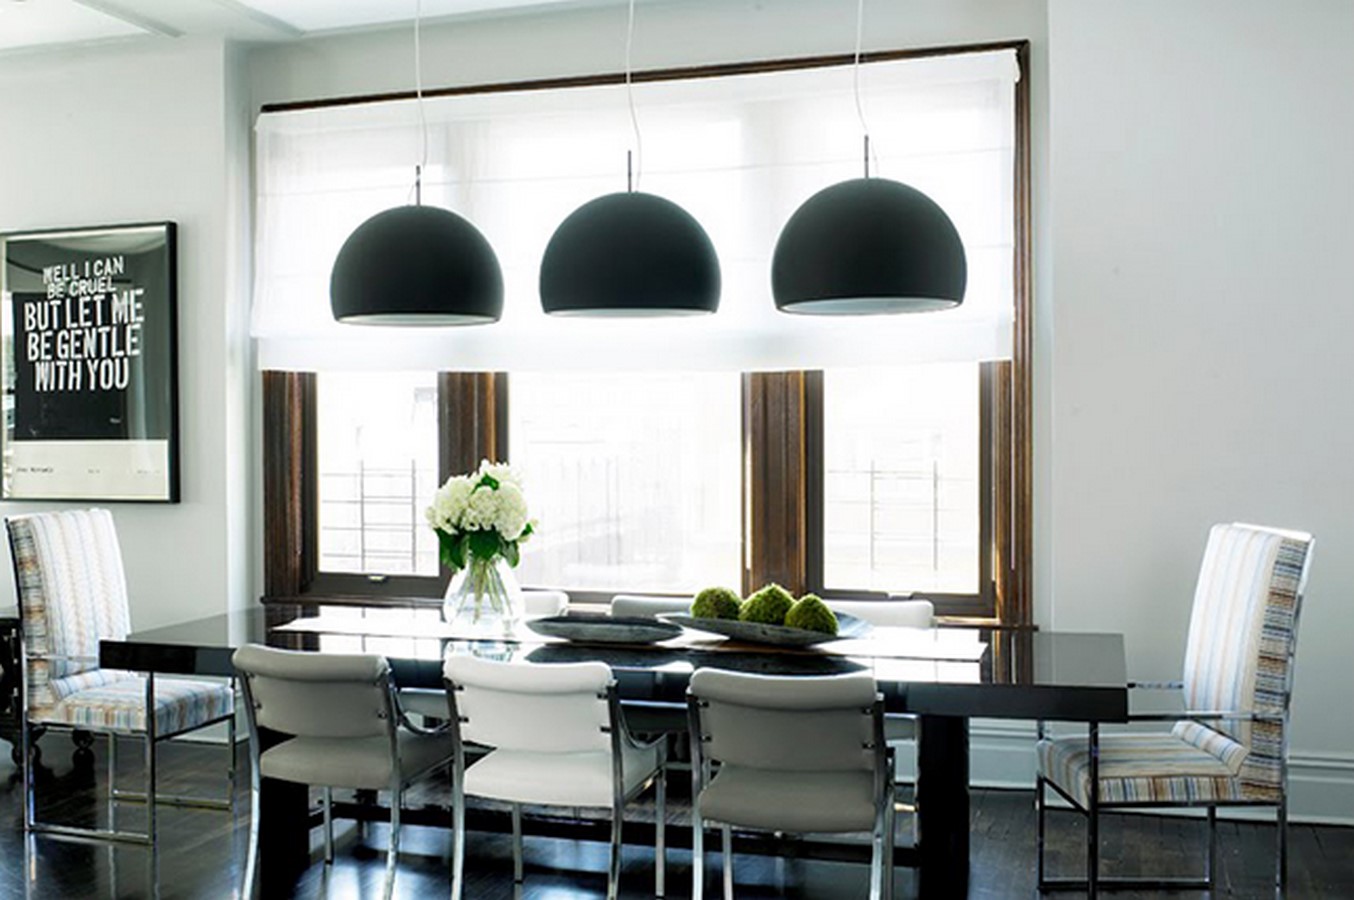 10 Dining rooms ideas that can enhance the space - RTF | Rethinking The